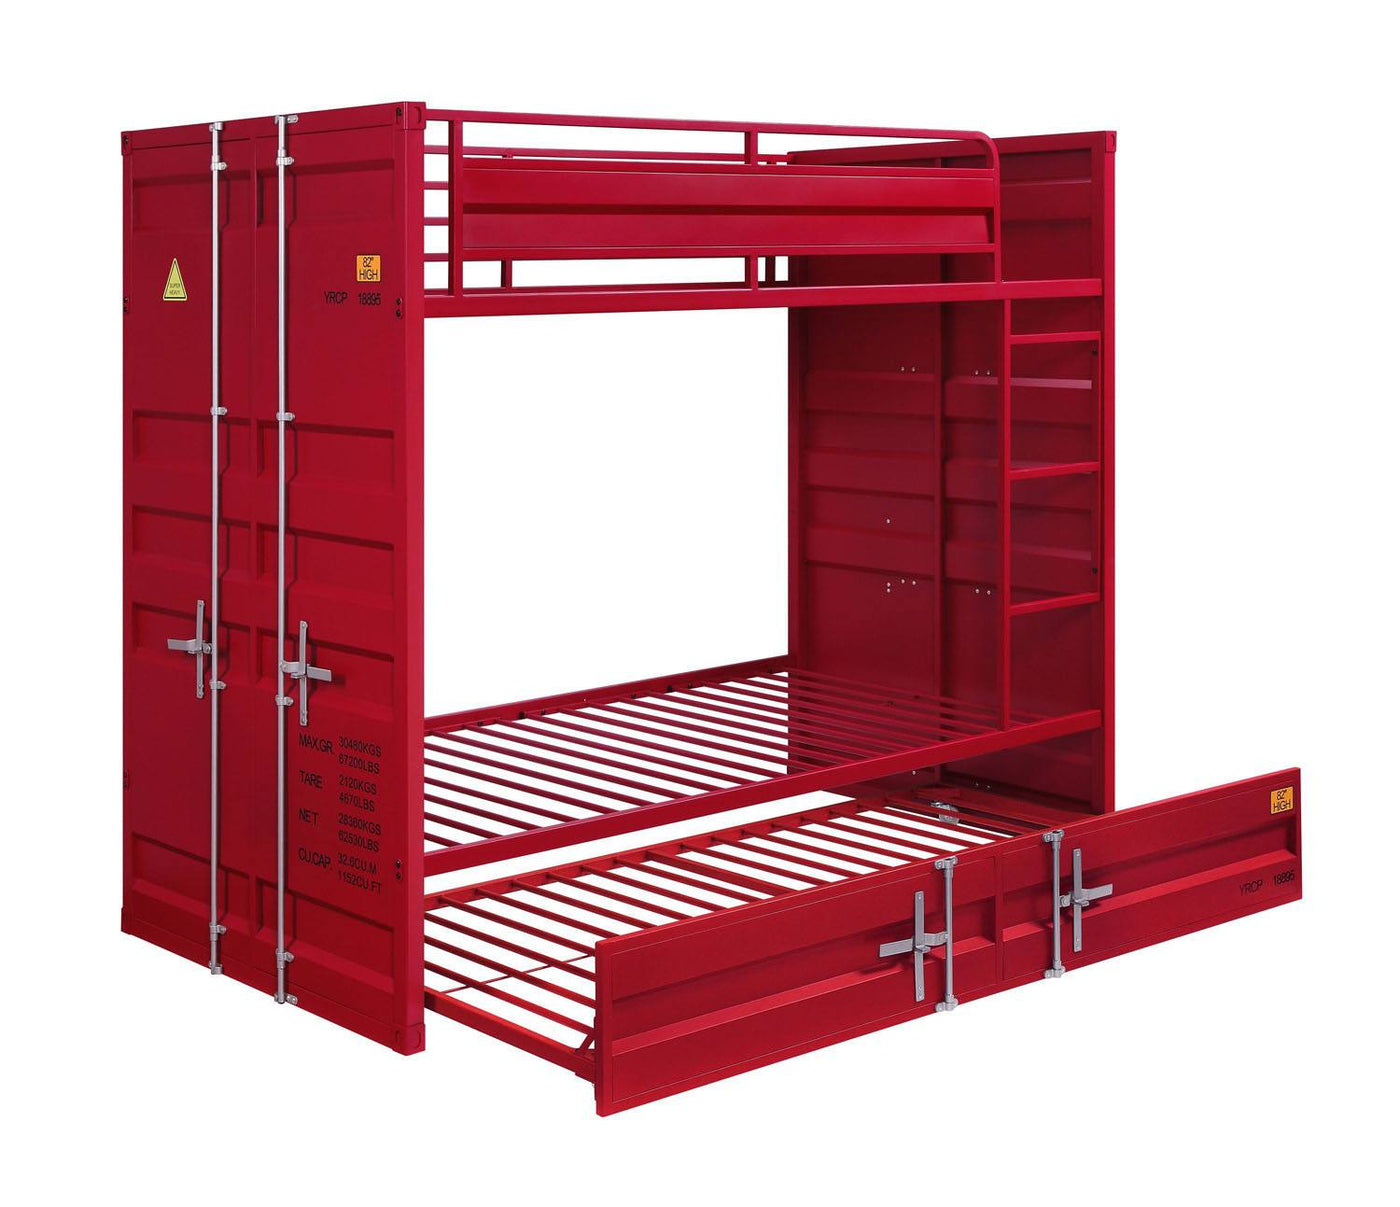 Konto Industrial Full Bunk Bed with Trundle - Red